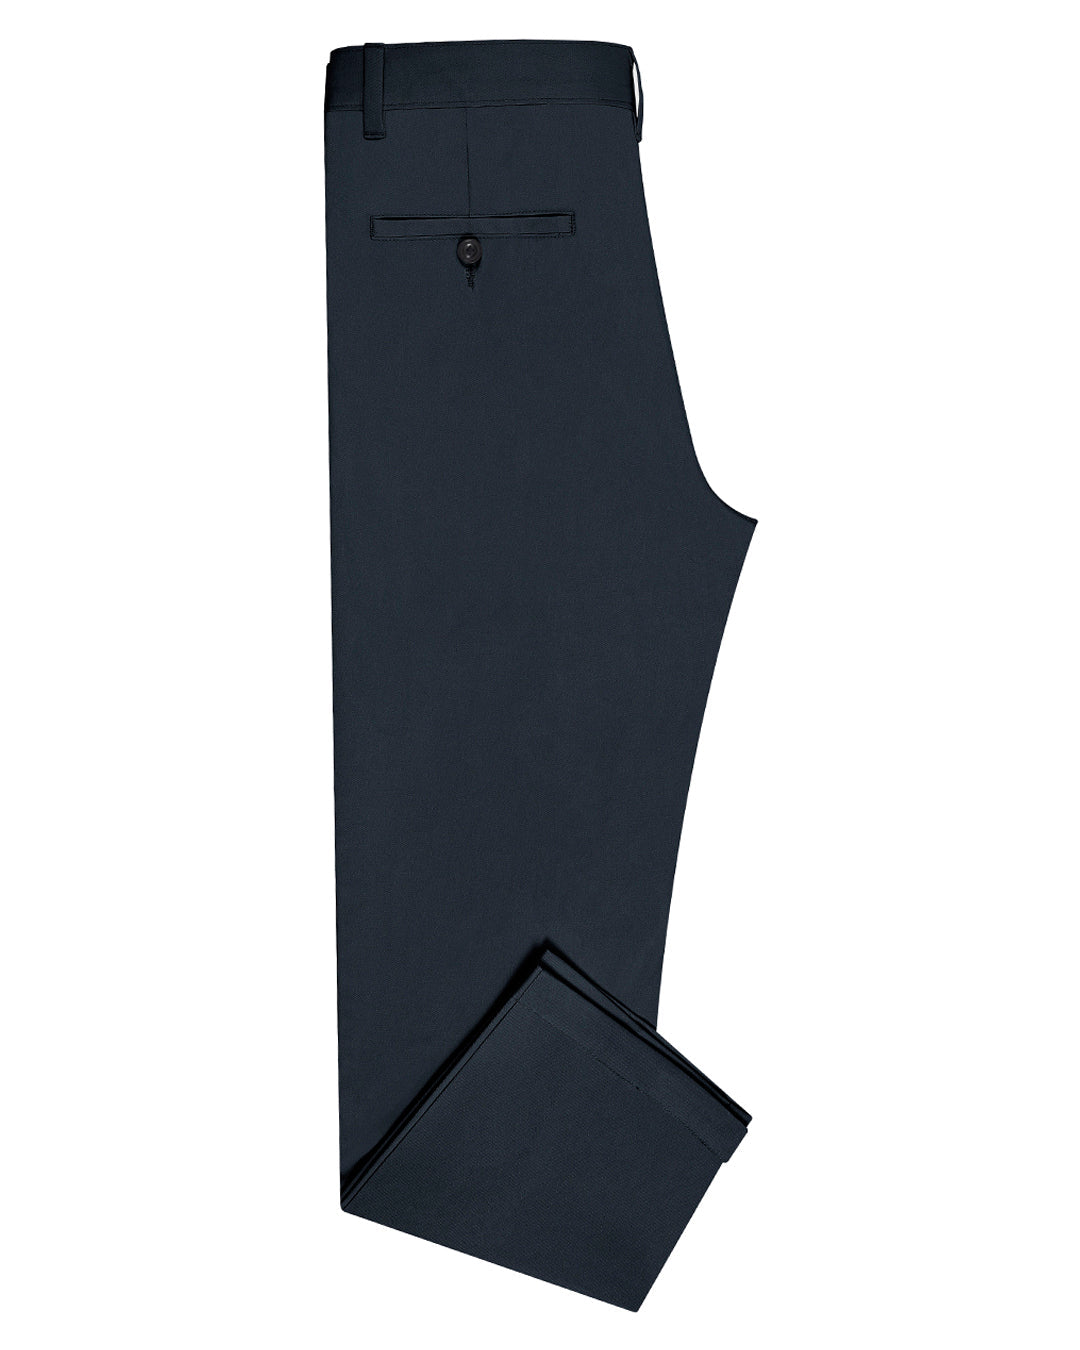 Side view of custom Genoa Chino pants for men by Luxire in dark teal blue